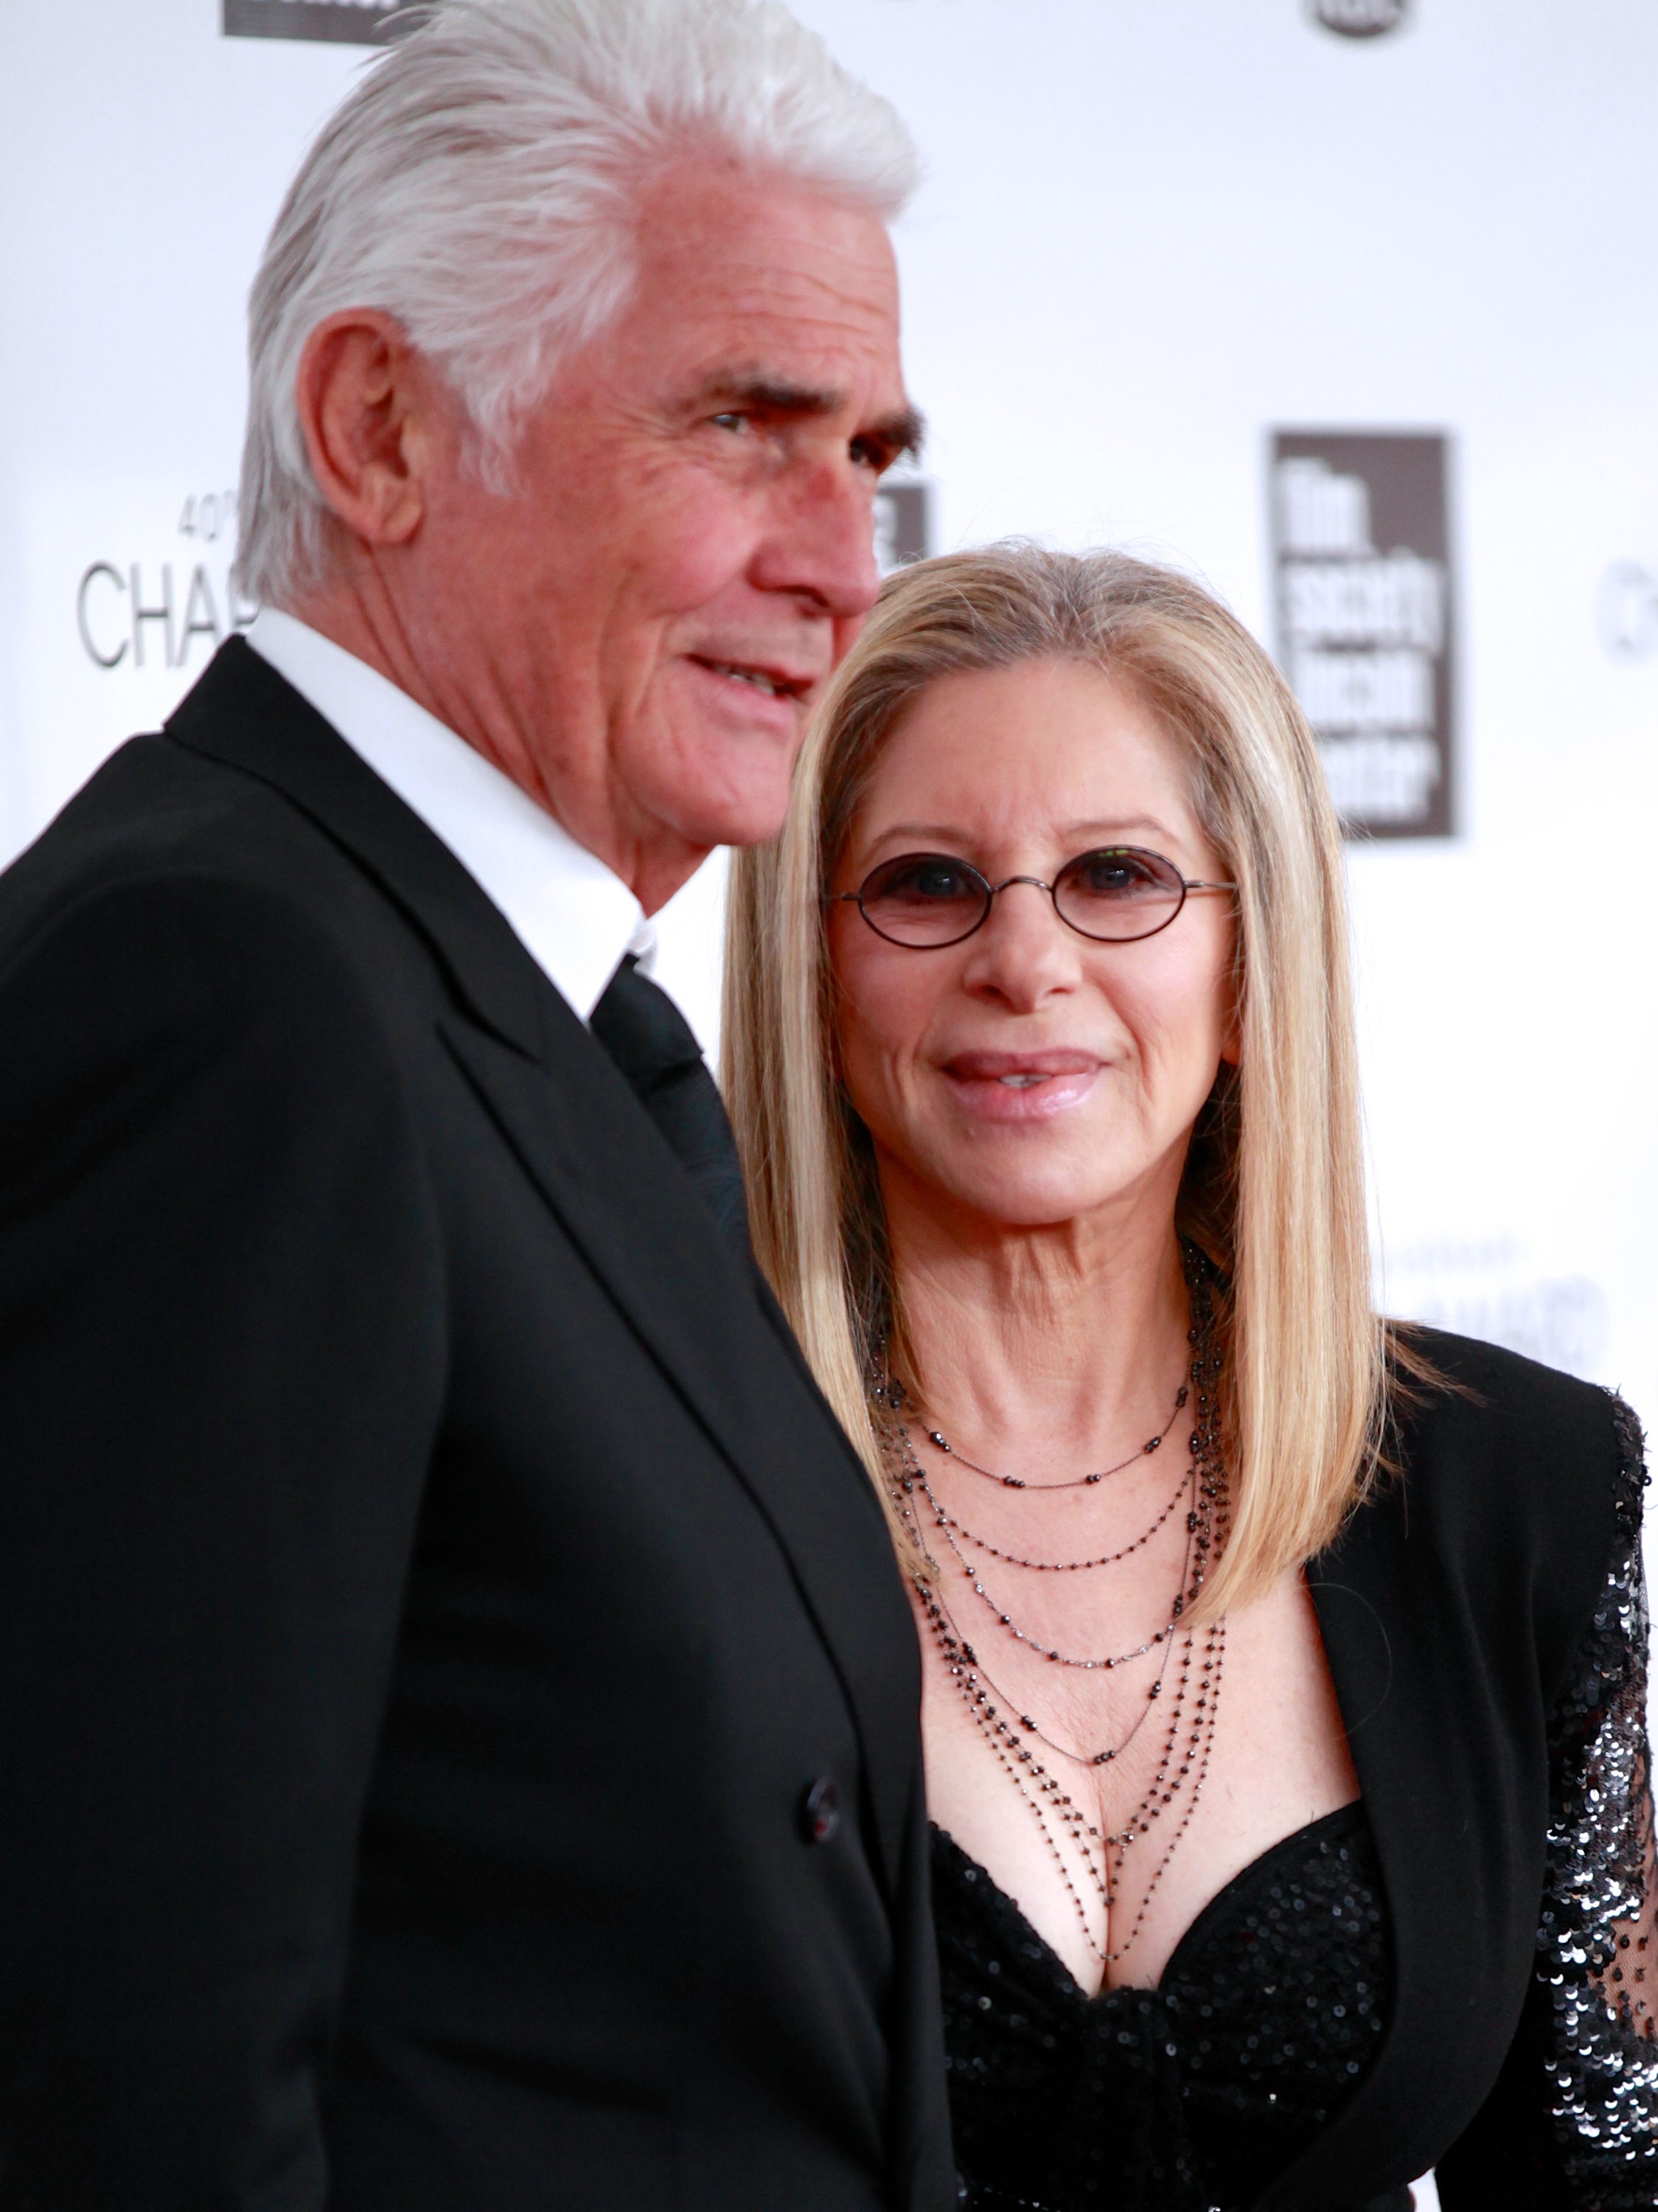 James Brolin and Barbra Streisand attend the 40th Anniversary Chaplin Award Gala at Avery Fisher Hall at Lincoln Center for the Performing Arts on April 22, 2013 in New York City. | Source: Getty Images